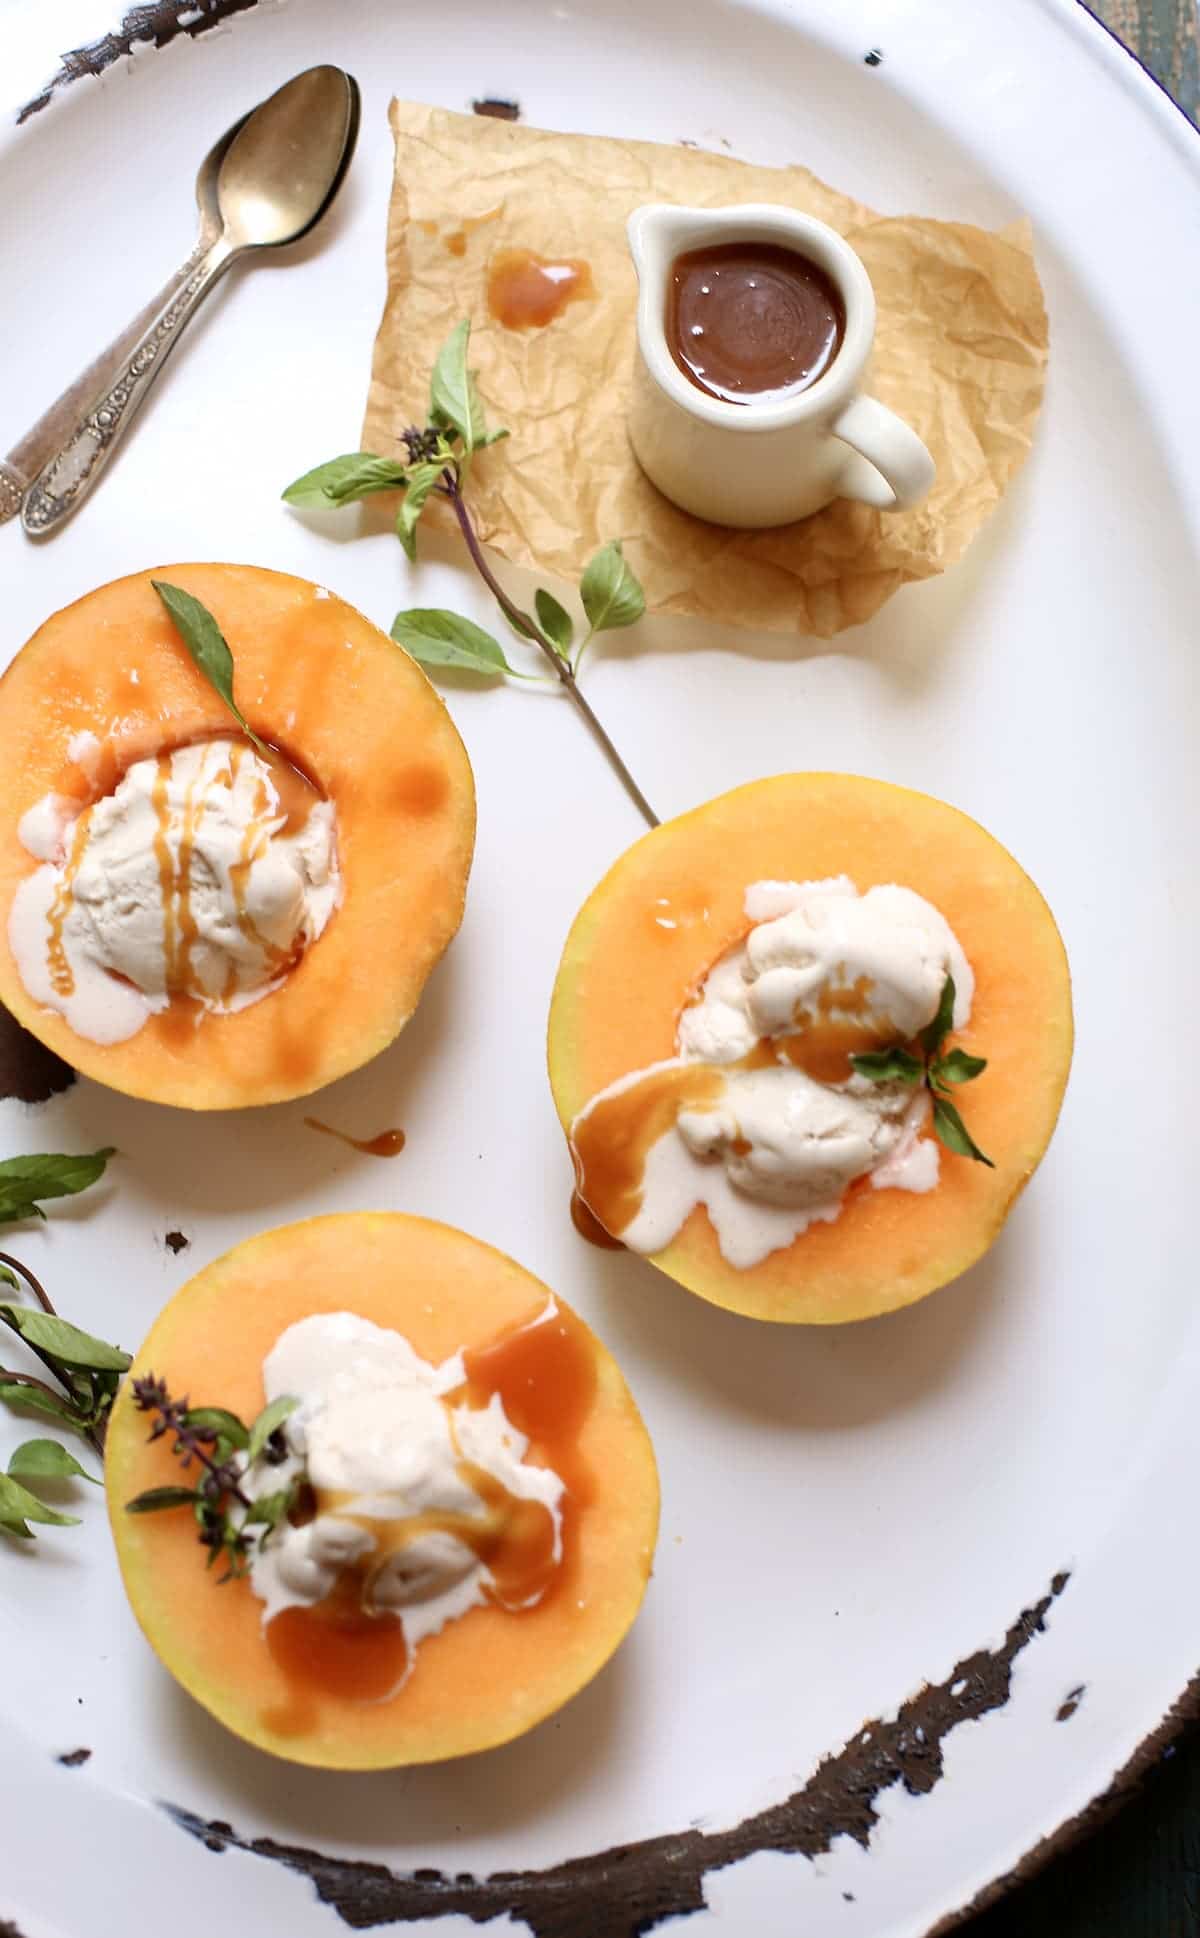 three orange melon halves with ice cream in the center and caramel sauce and a pitcher of caramel sauce and also spoons, sitting on a white platter.